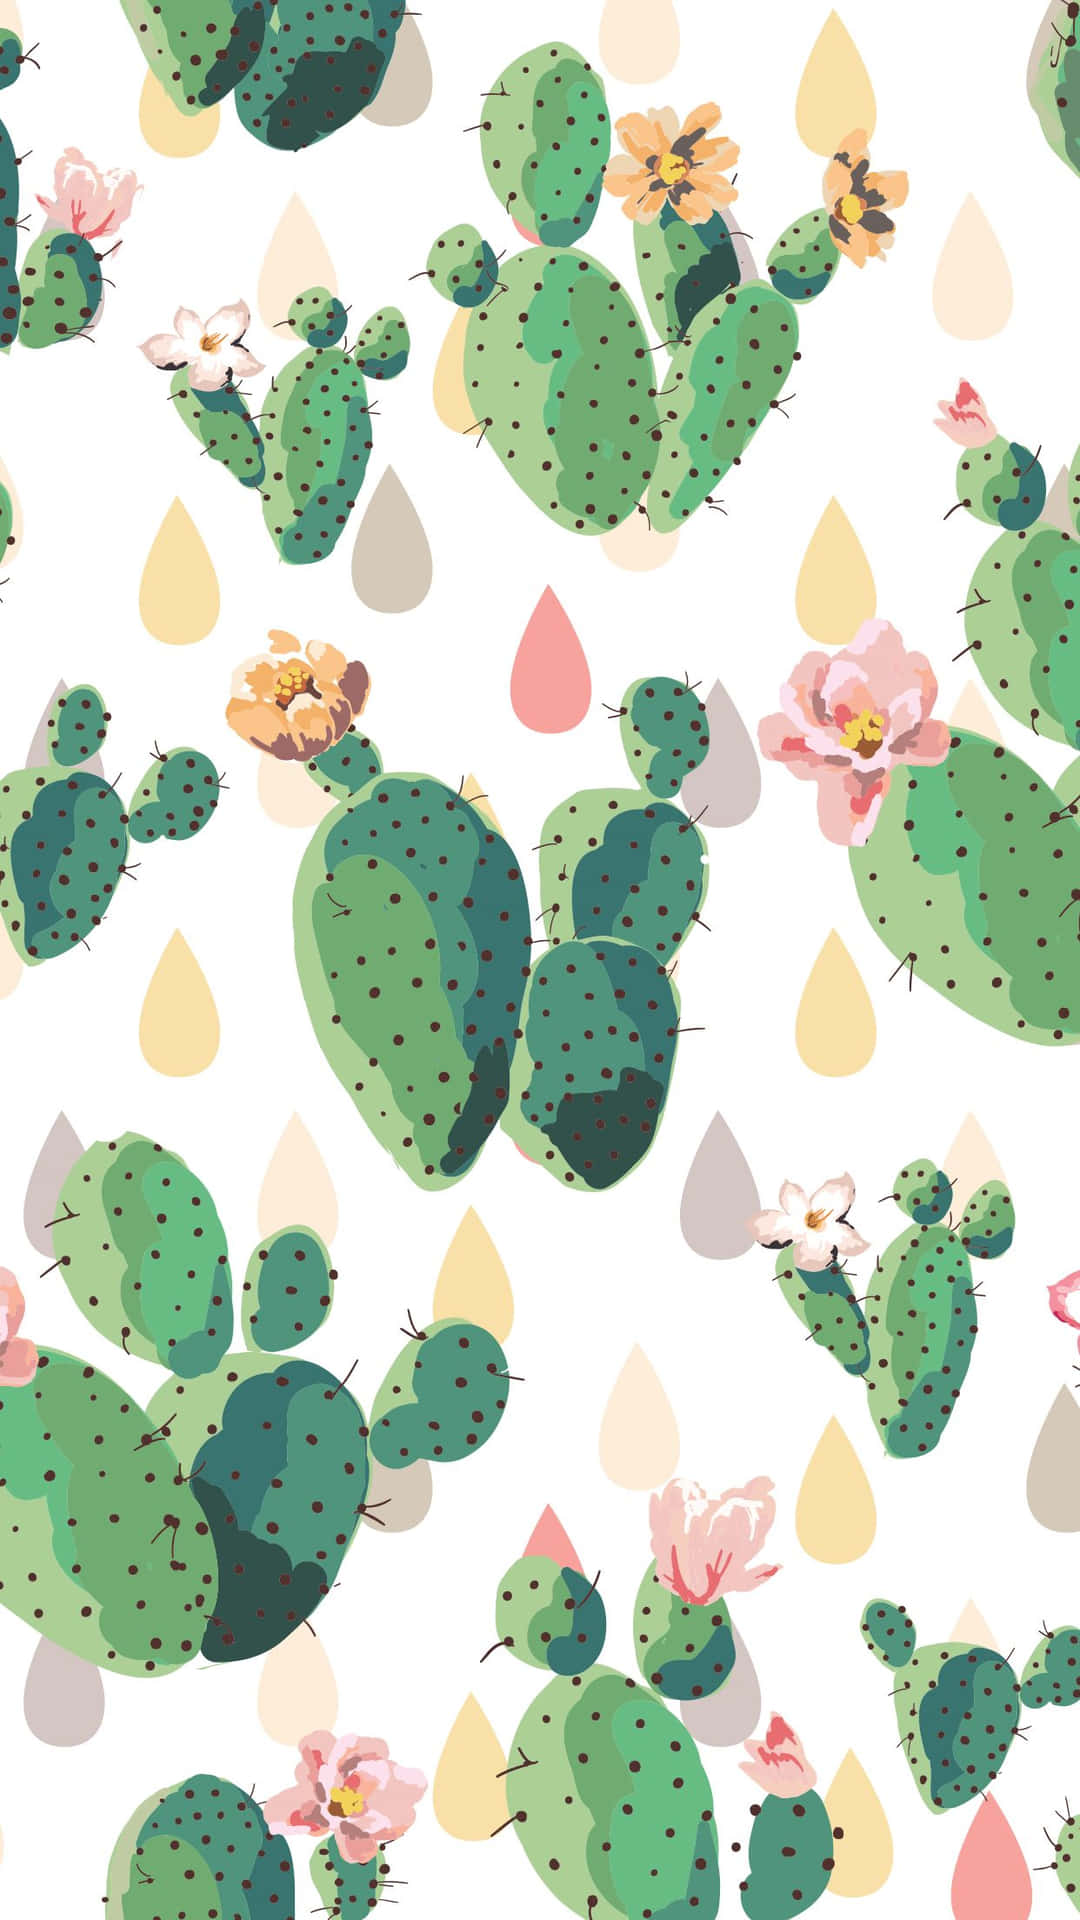 Kawaii Cactus: A cute and lovable cactus illustration in a minimalist style Wallpaper